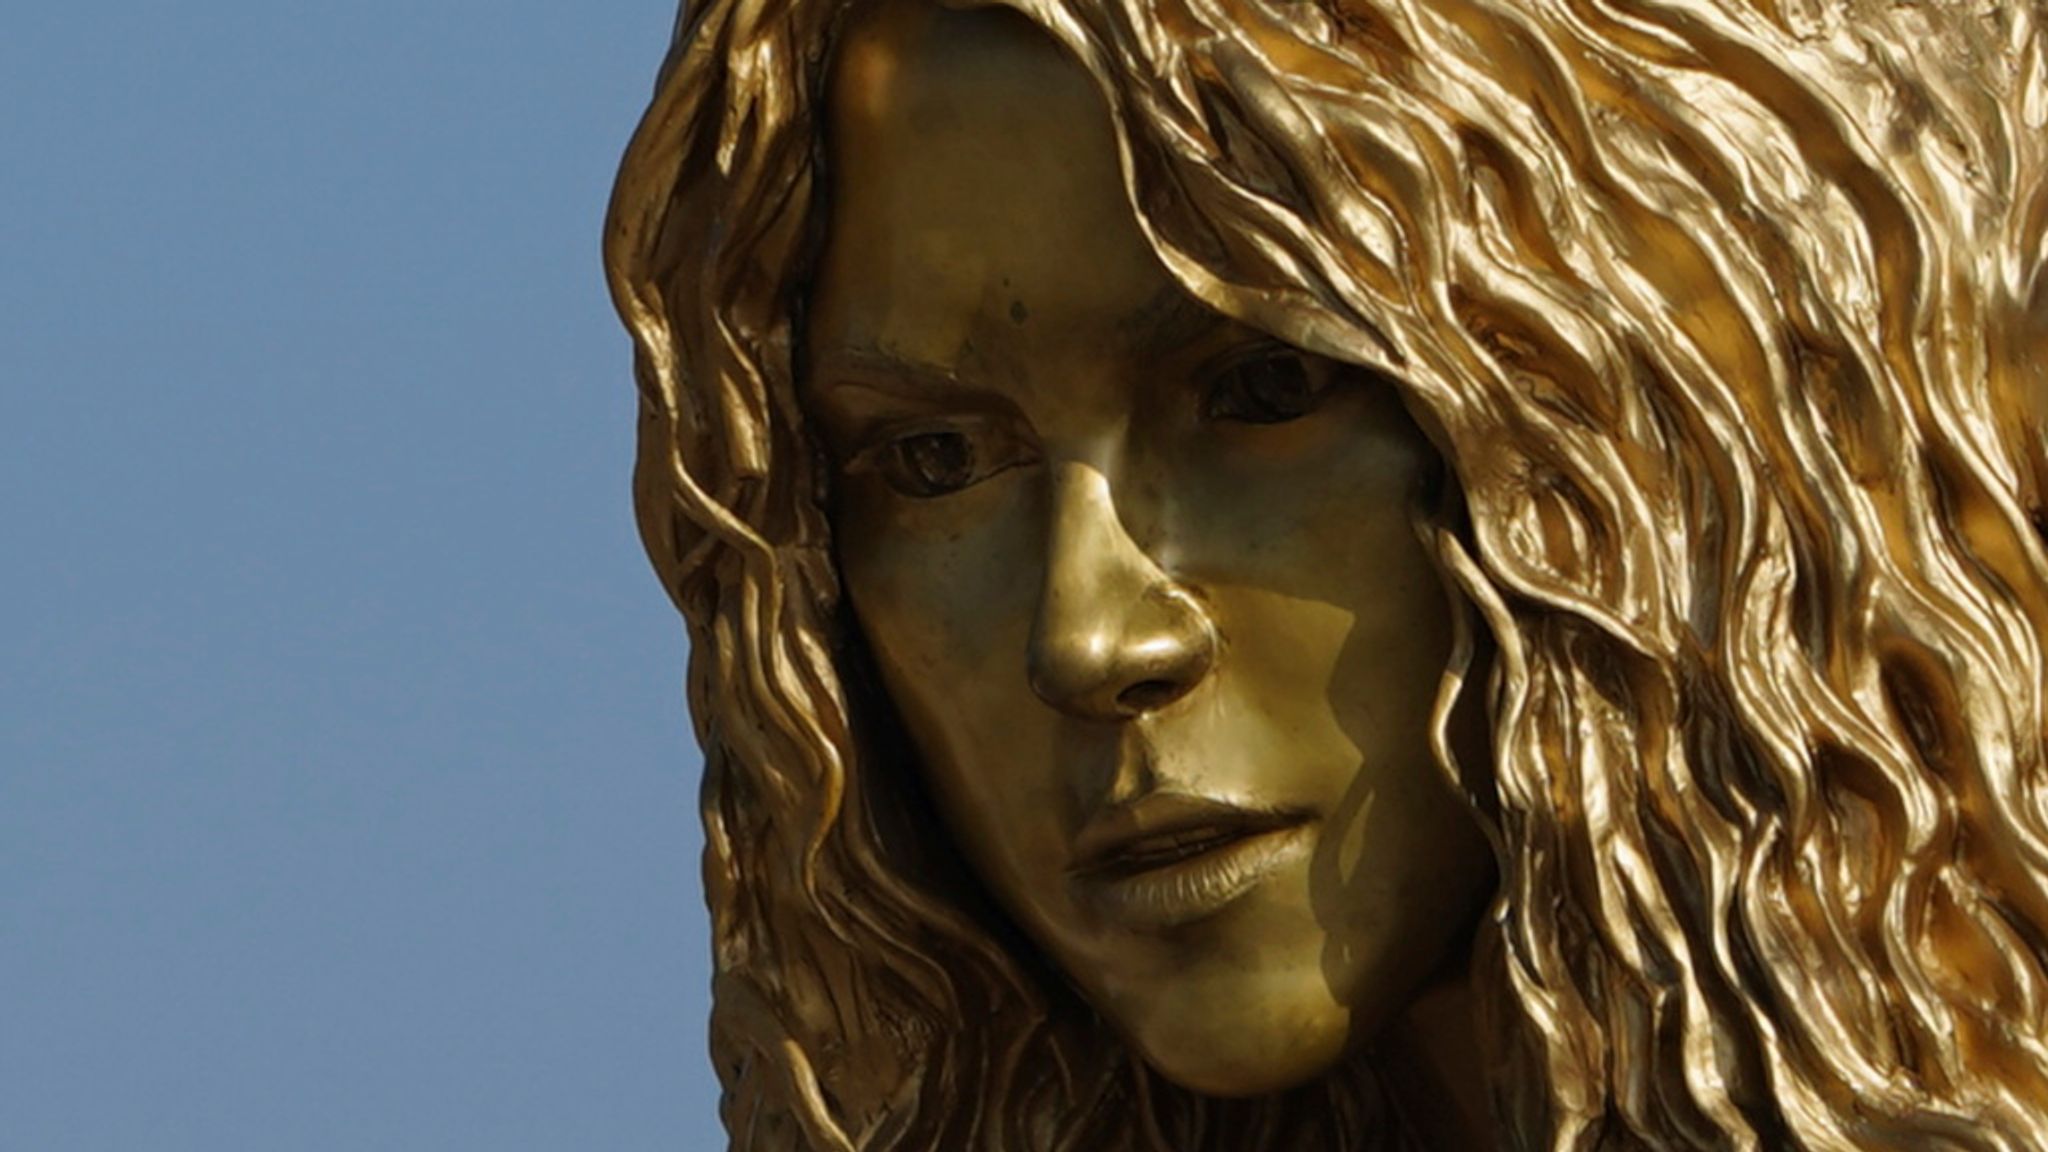 Giant bronze statue of Shakira unveiled in star's hometown